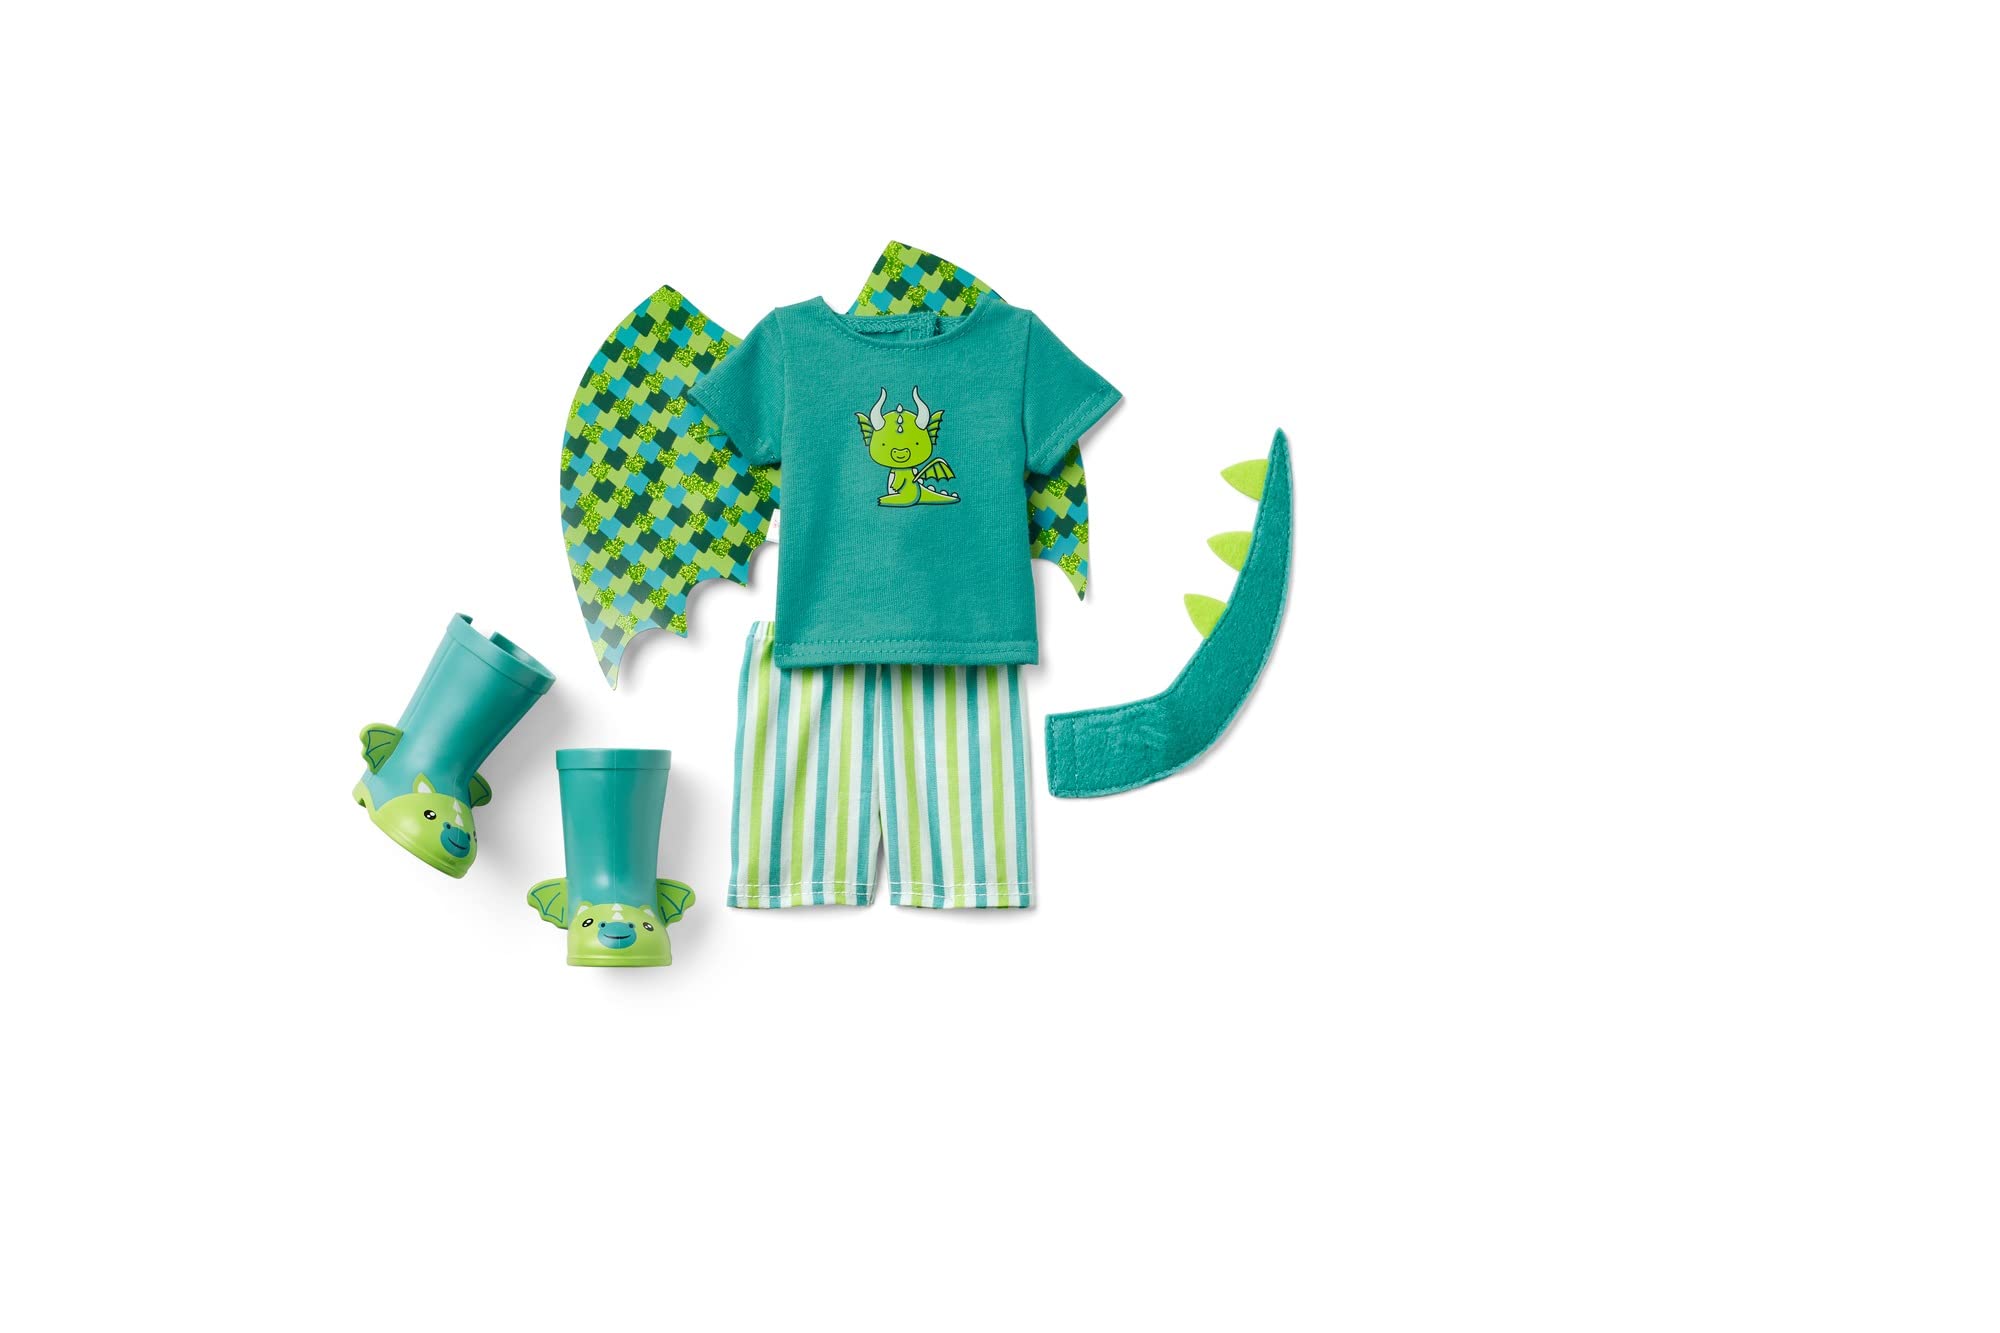 American Girl WellieWishers Bryant 14.5-inch Doll with Green Eyes, Medium Skin, Freckles, Brown Hair, a Short-Sleeved T-Shirt, Blue-and-Green Striped Shorts, Glittery Dragon Wings, Ages 4+